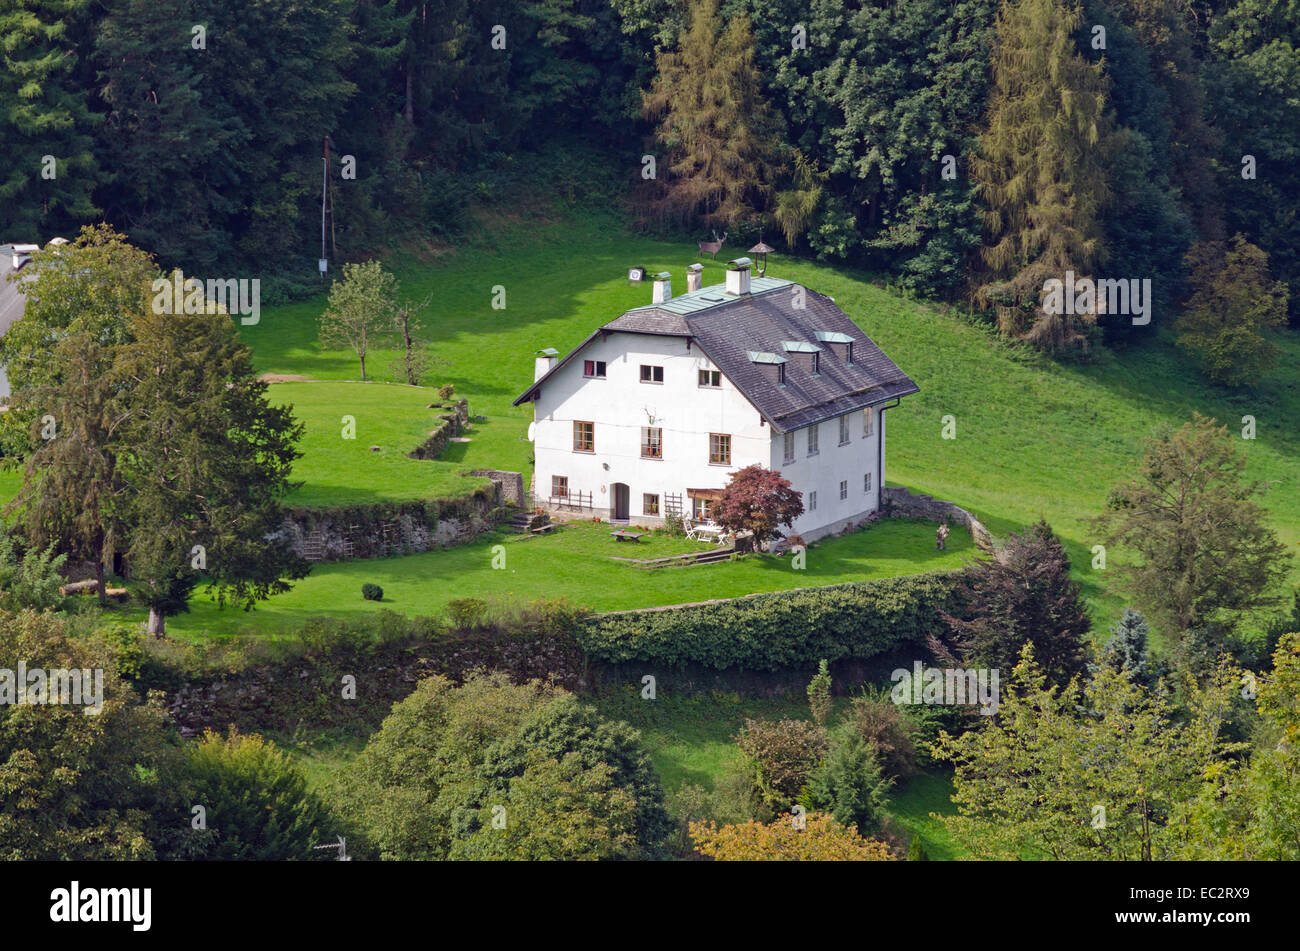 White house in Alps landscape on green grass lawn. Stock Photo